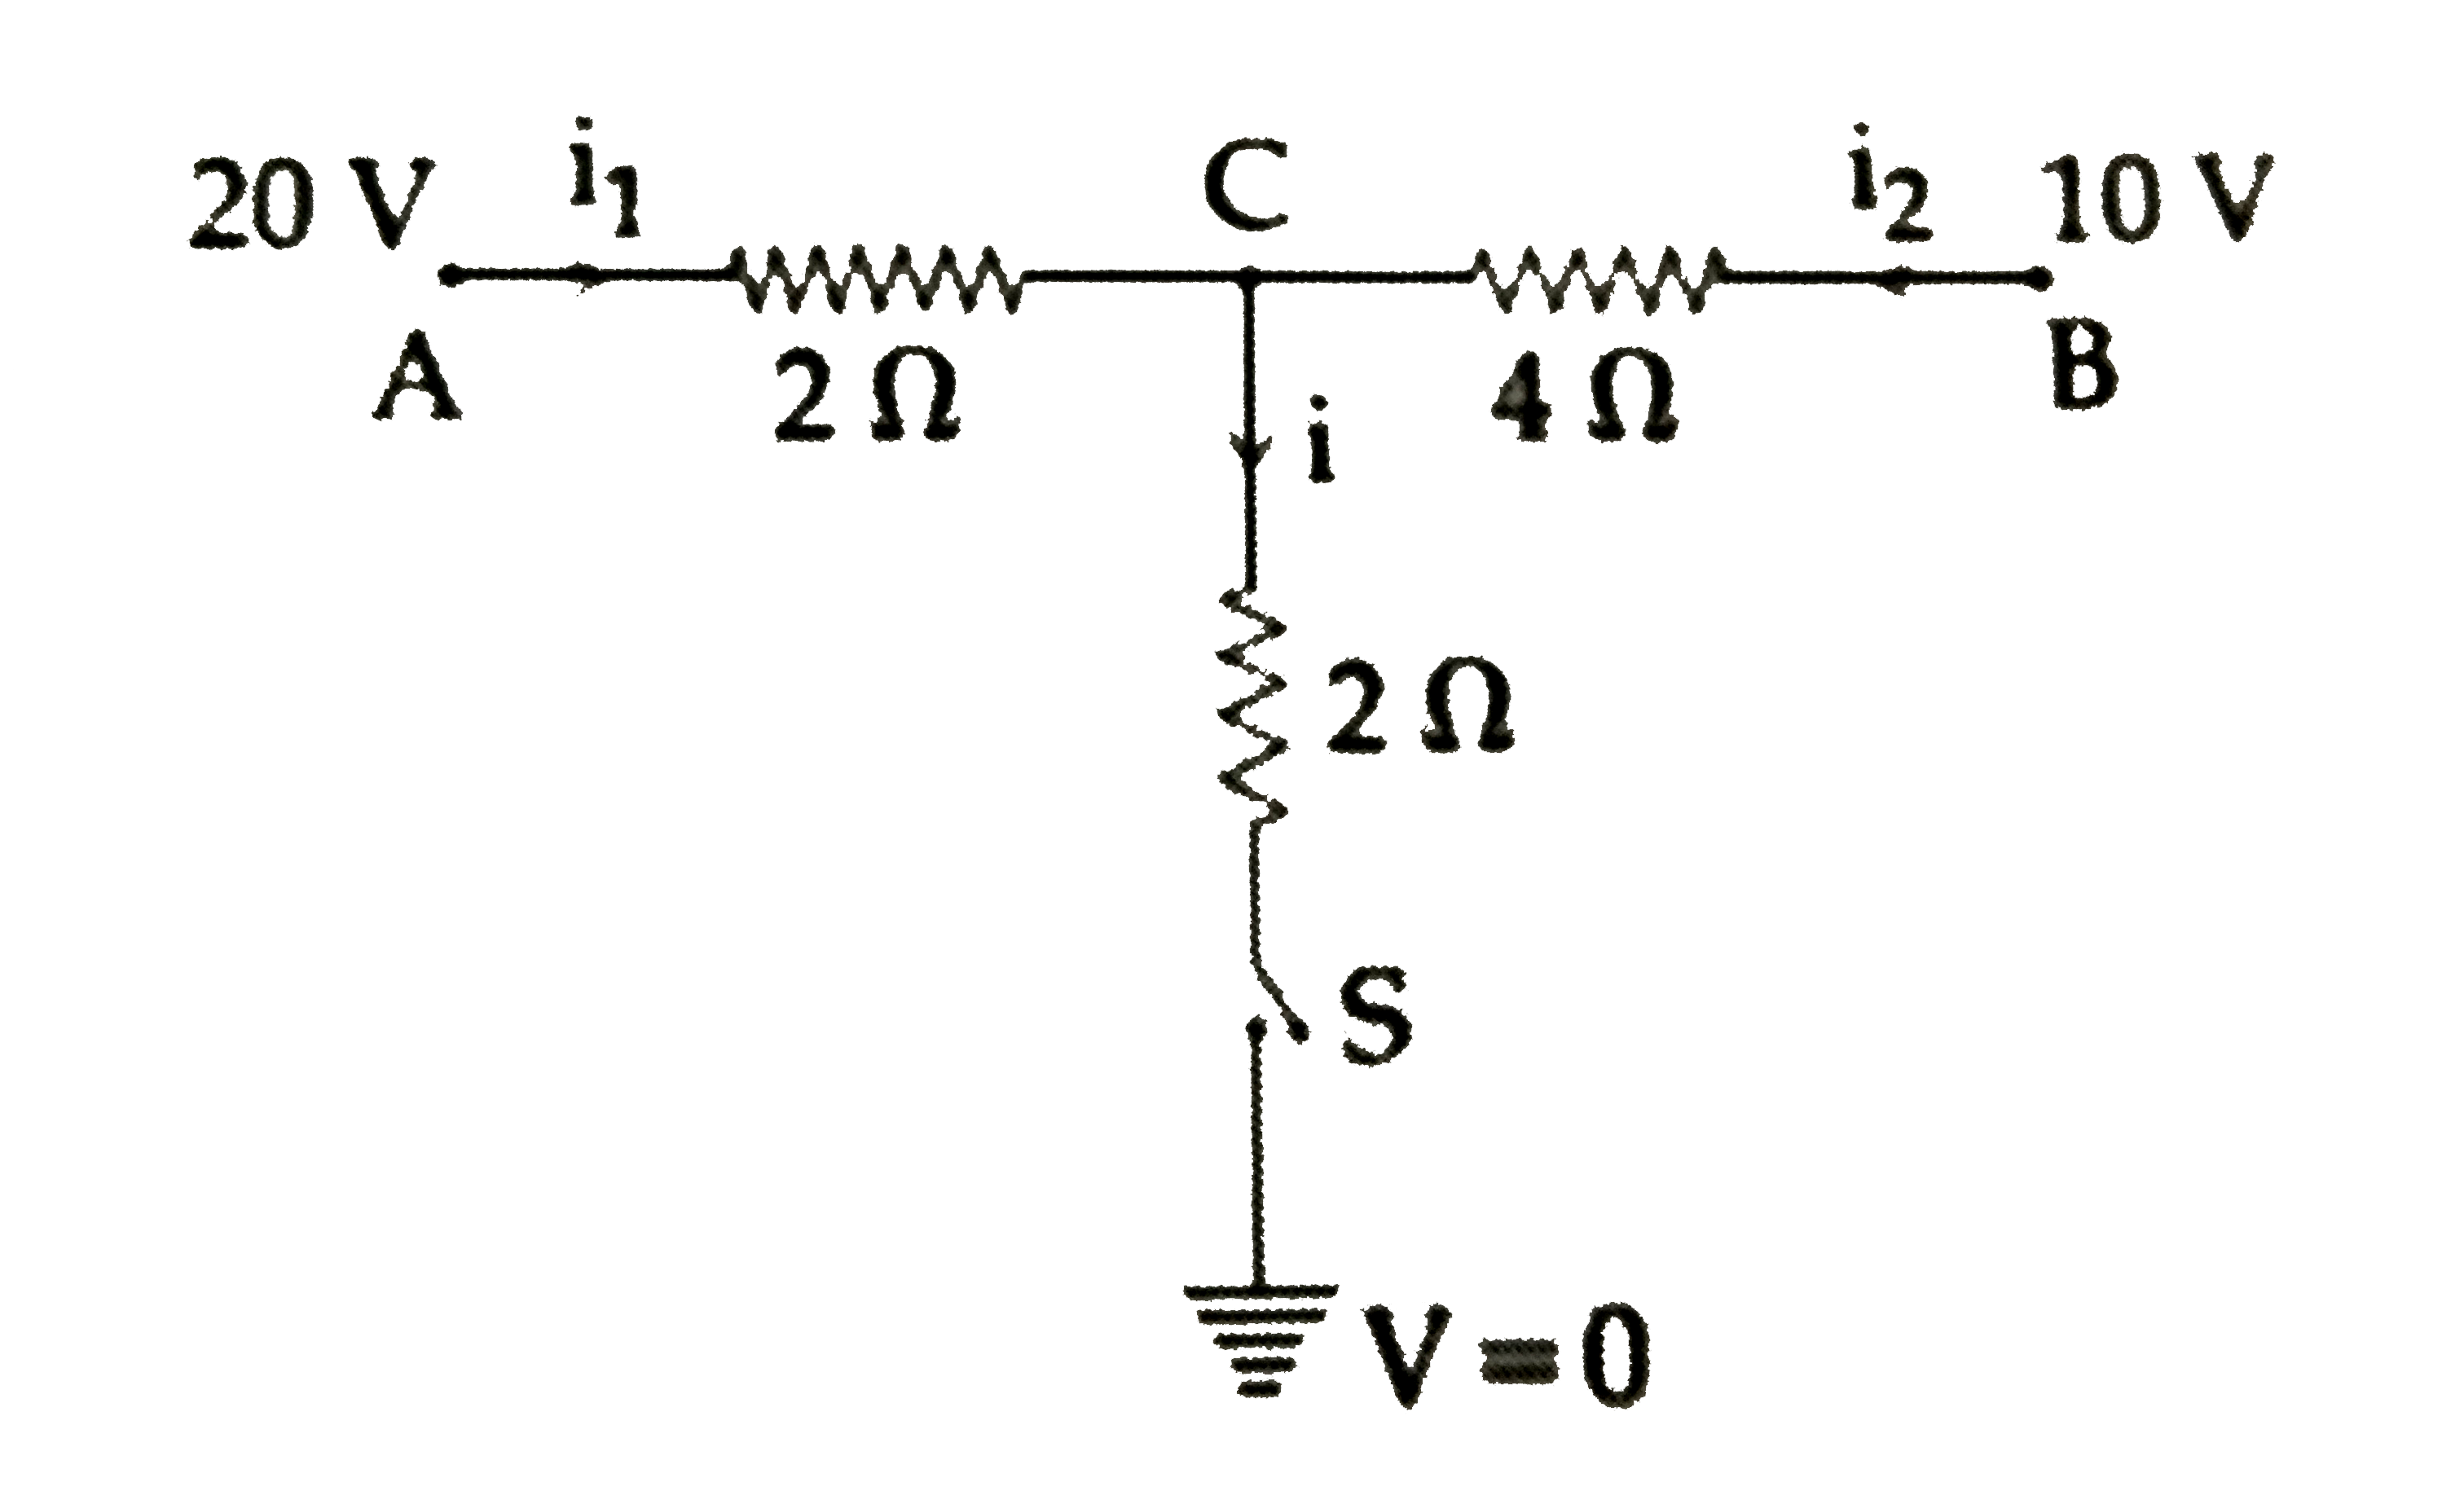 When the switch S, in the circuit shown, is closed, then the value of current I will be :